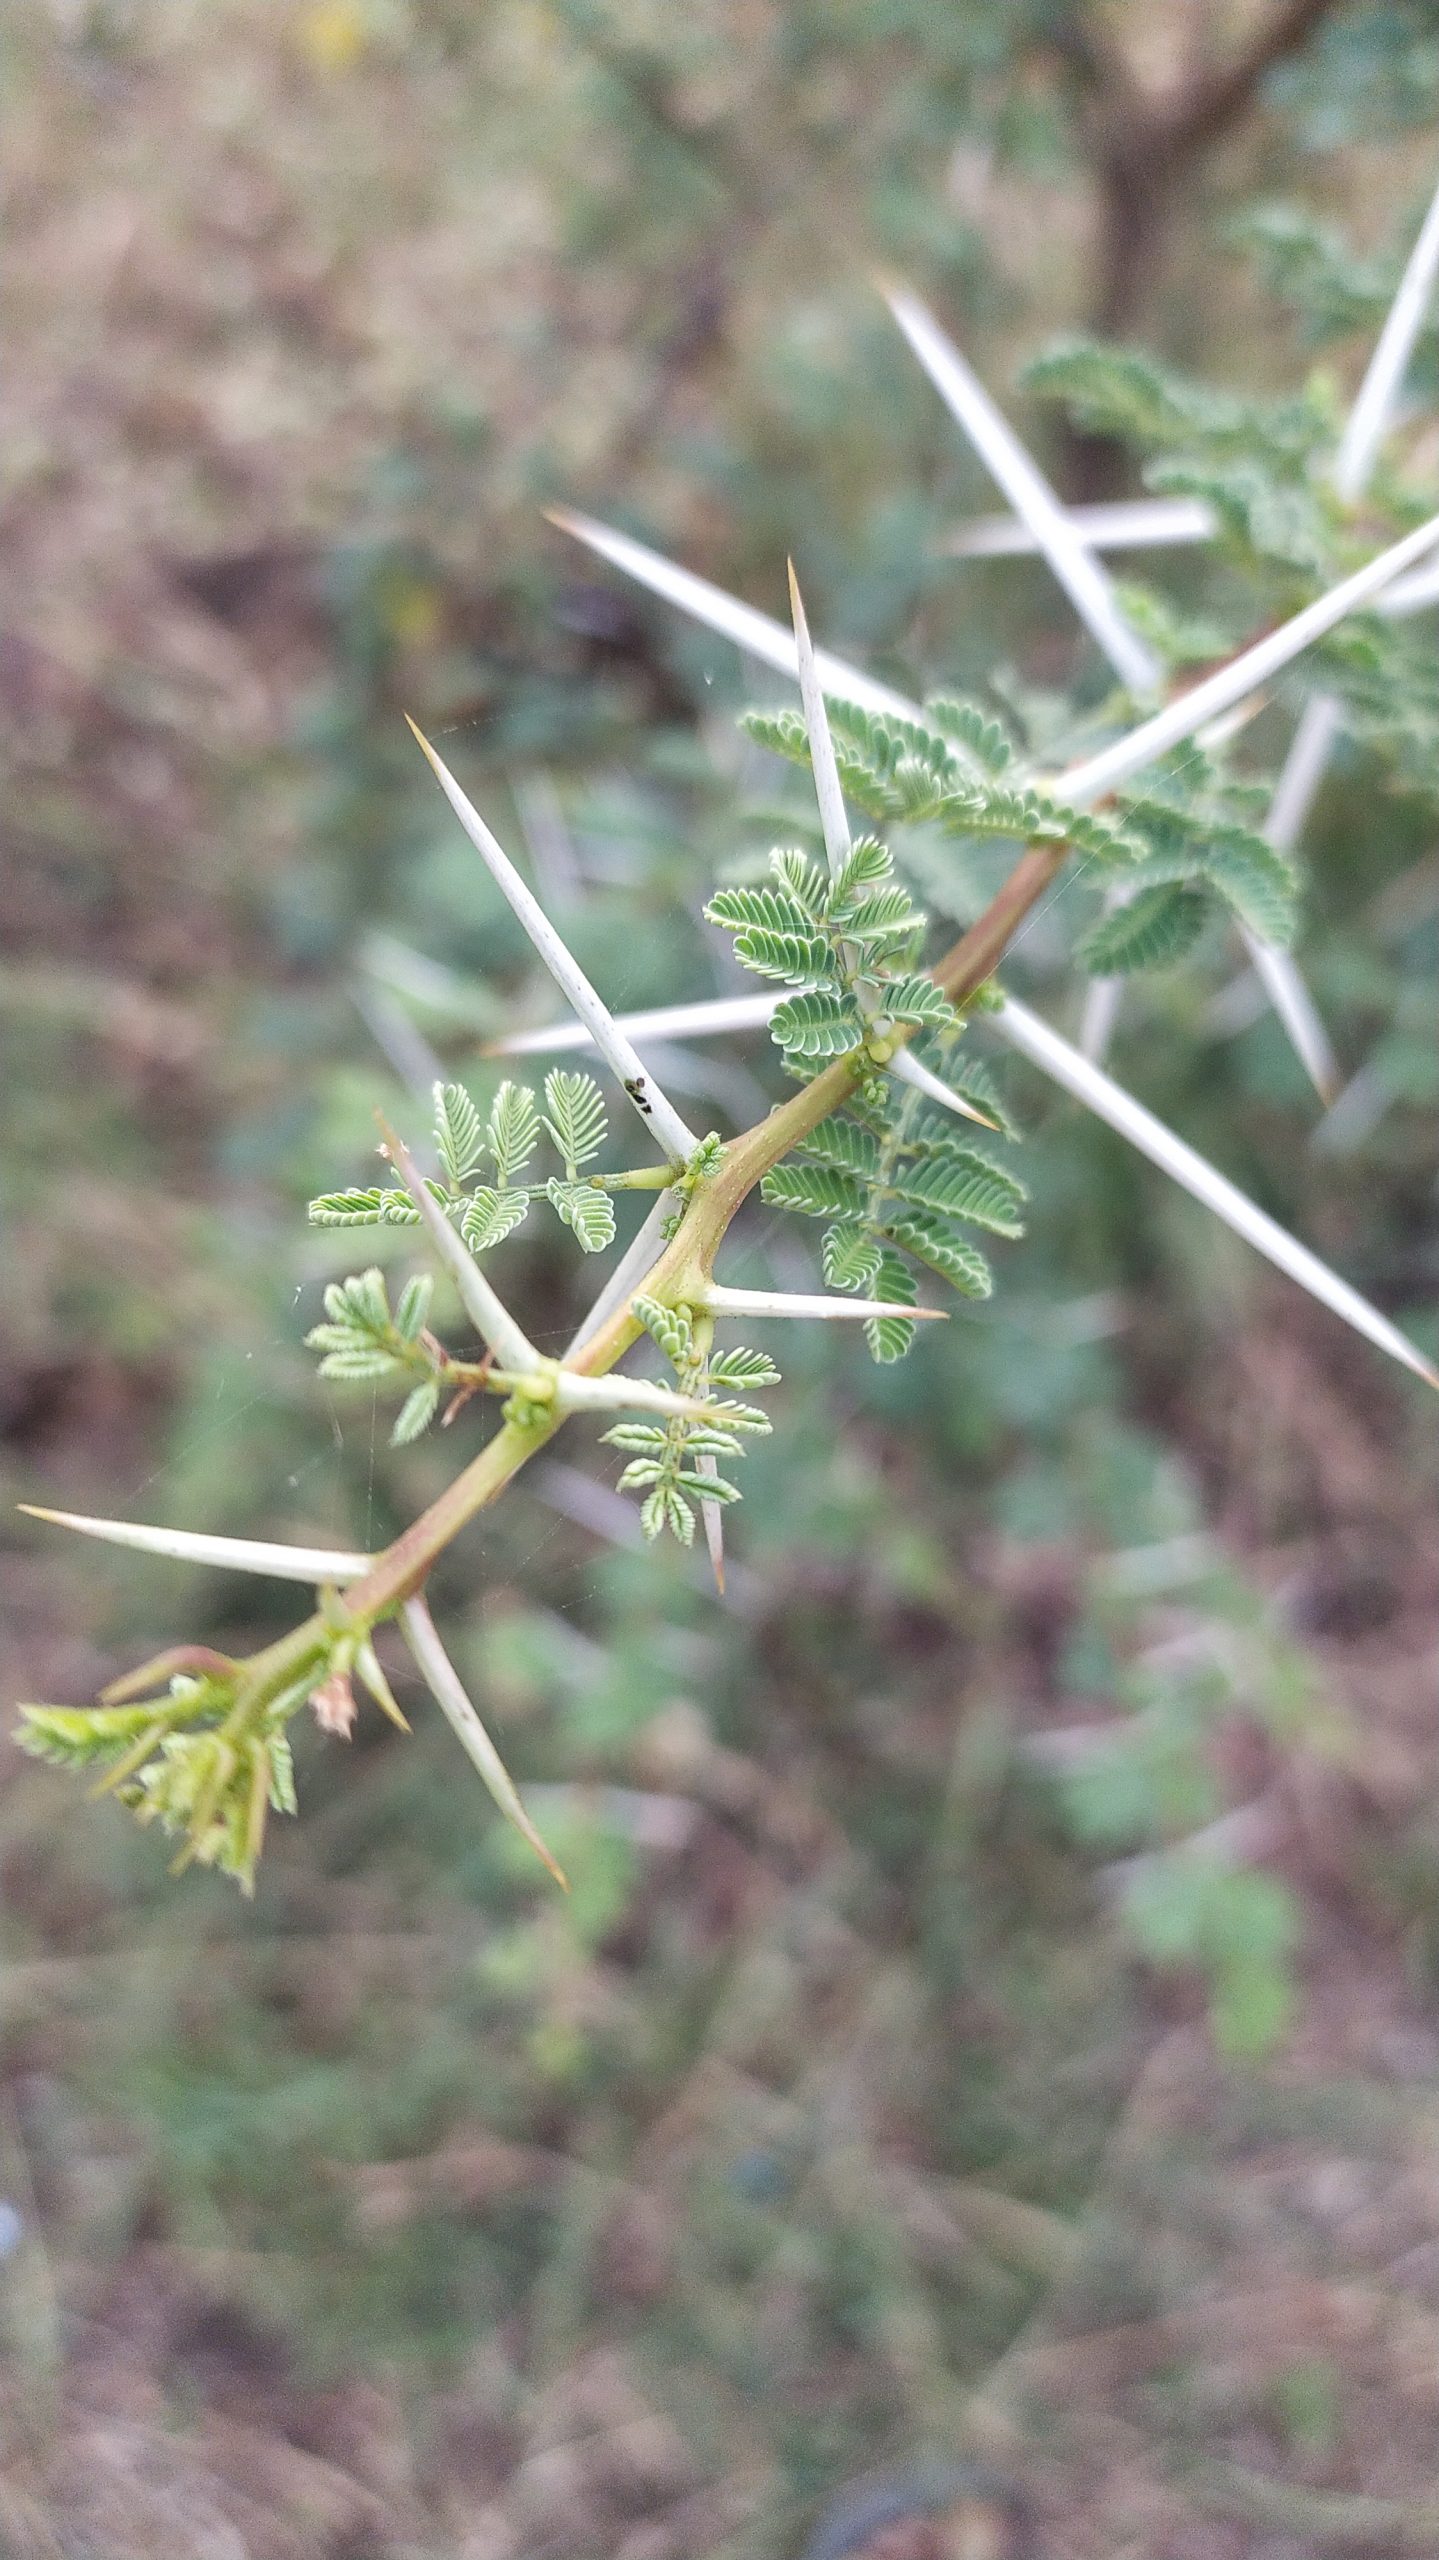 A thorny branch